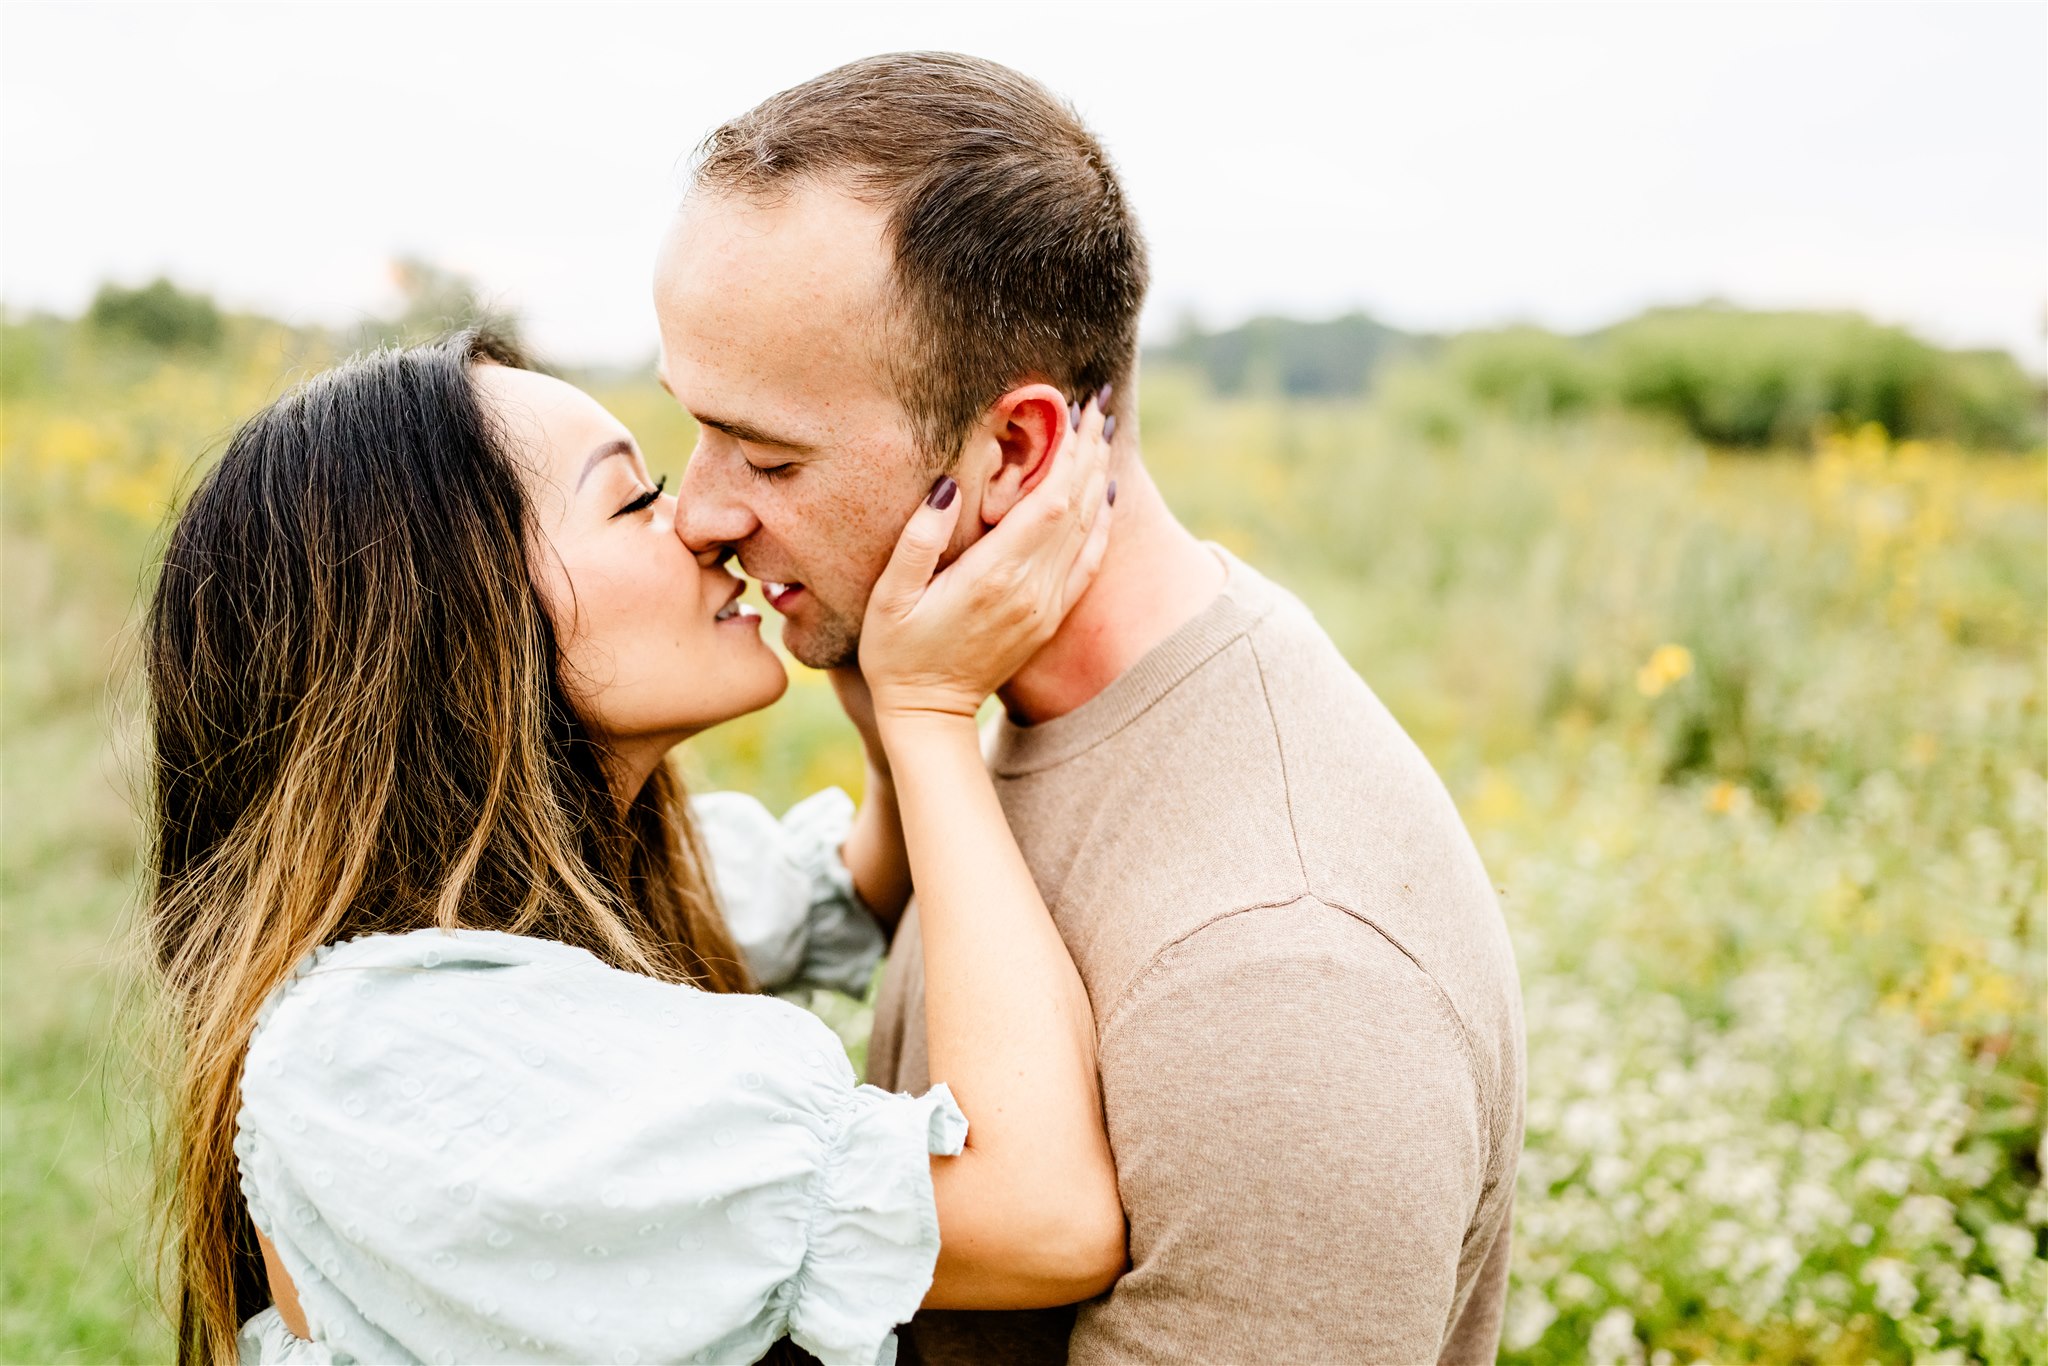 A couple lean in for a kiss while standing in a field of wildflowers during Naperville Activities For Couples